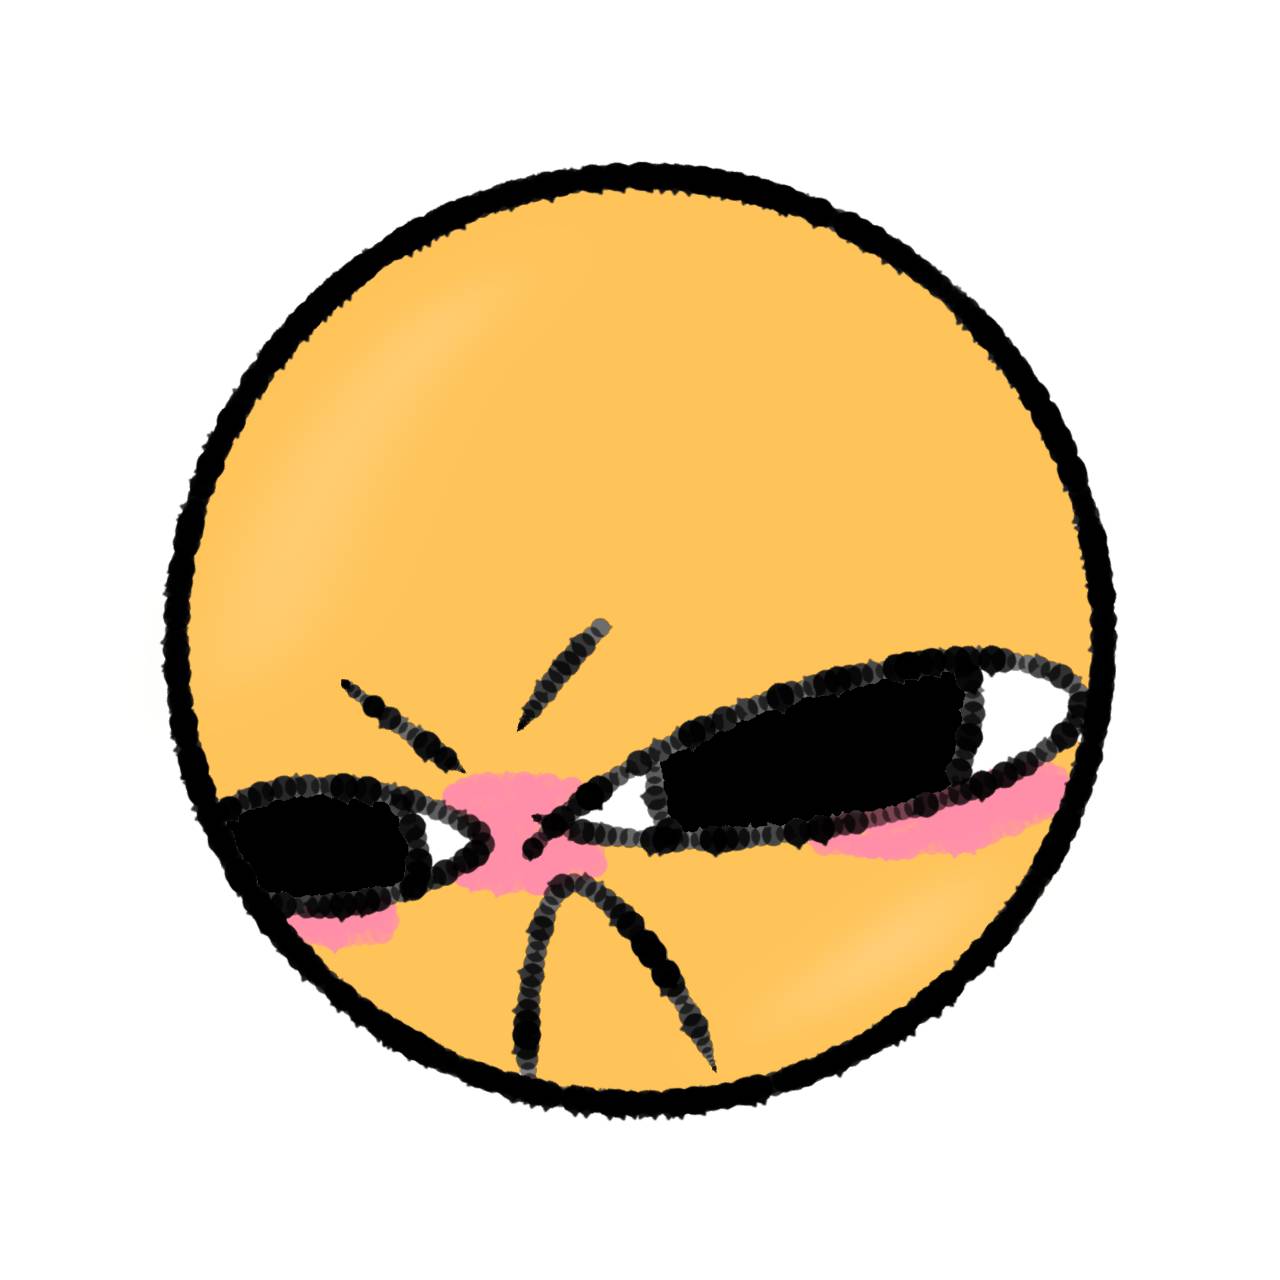 Cursed emoji crying in 3d tears by Coneys-hell-world on DeviantArt